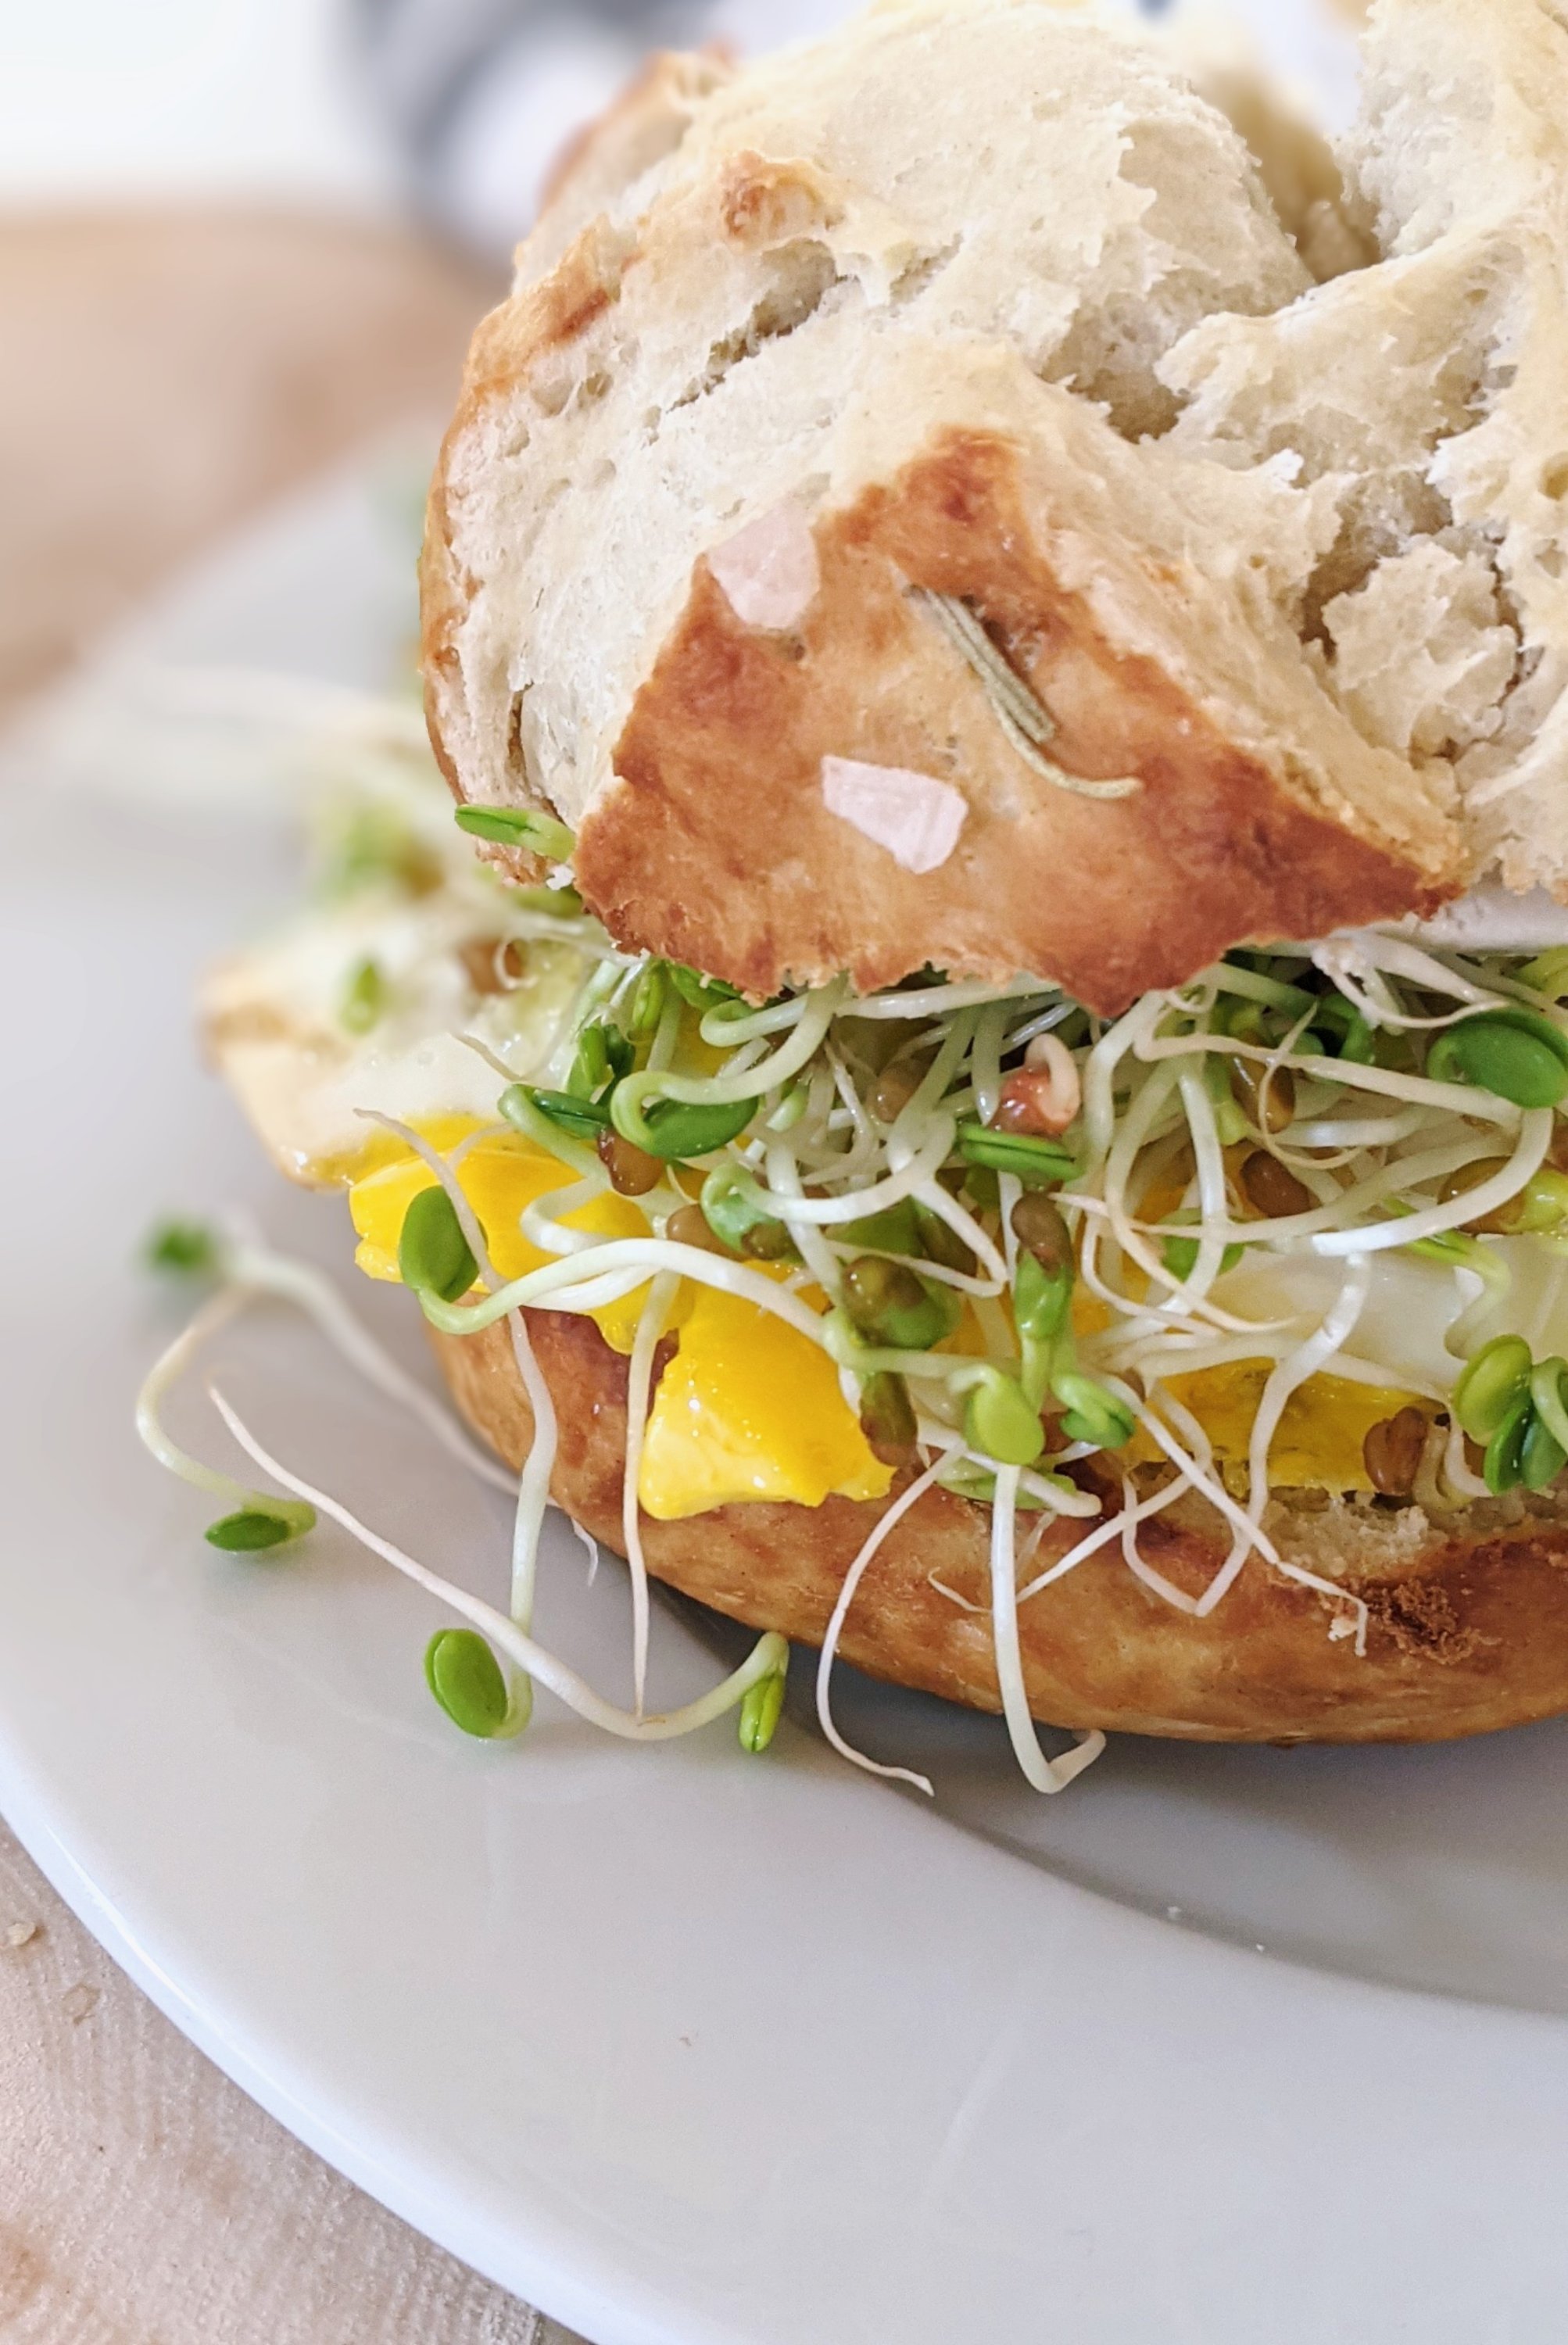 pretzel breakfast sandwich recipe with pretzel bread eggs sprouts and toppings for a breakfast bar ideas for weddings rehearsal dinners mother's day brunch ideas